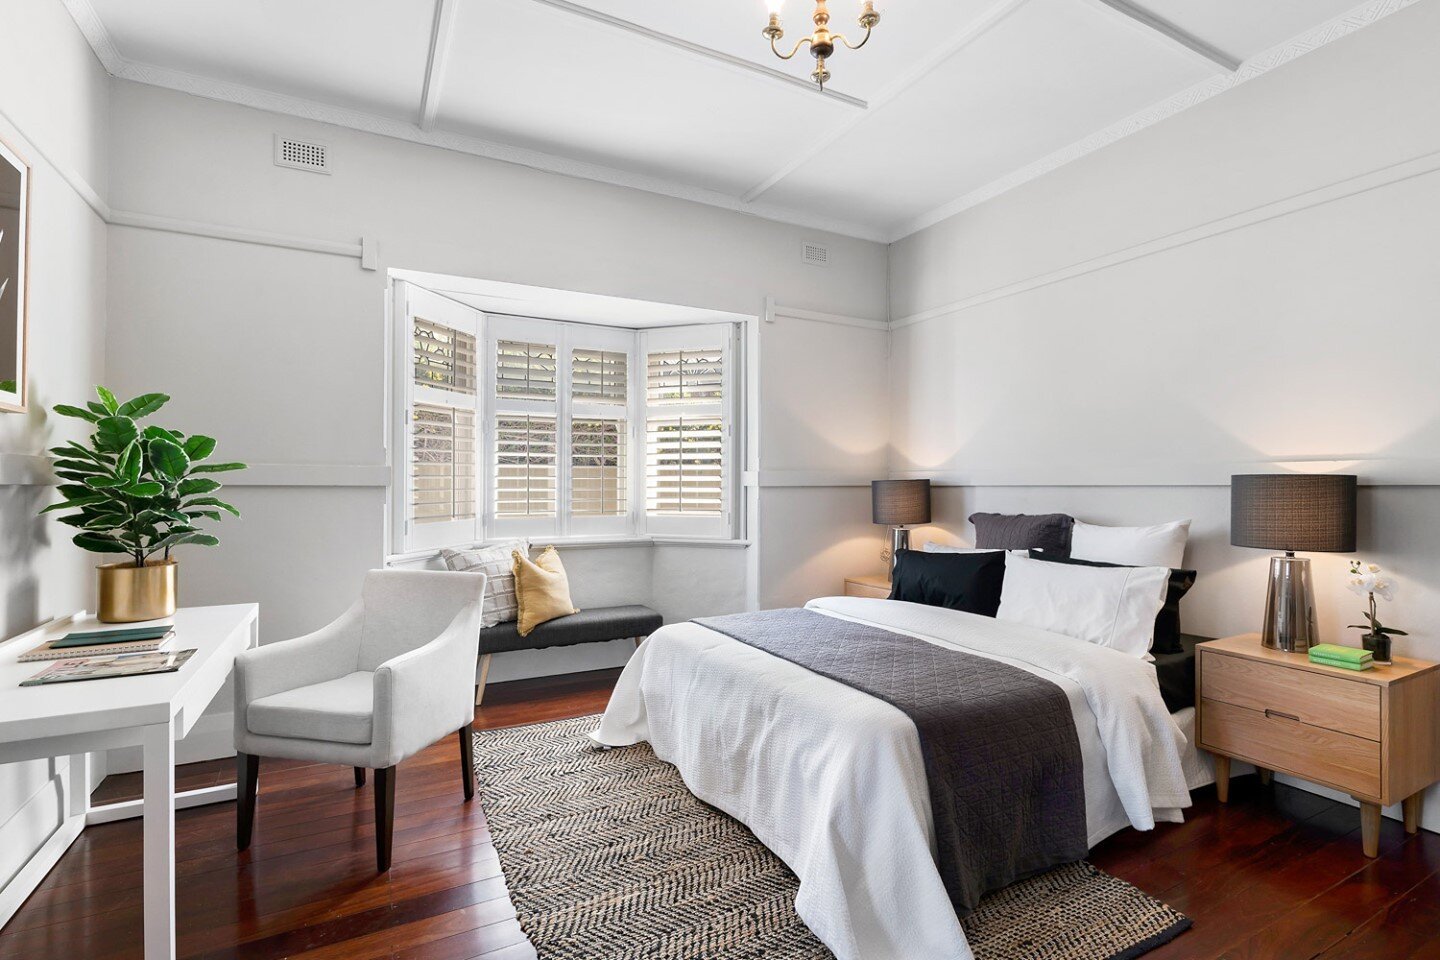 [Real Estate] Who else likes character homes? They are always such a joy to photograph, especially when the second bedroom is just as impressive as the master. 🏡⁠
⁠
@diakritanz @raywhitegrange ⁠
⁠
#adelaide #realestate #realestatephotography #adelai